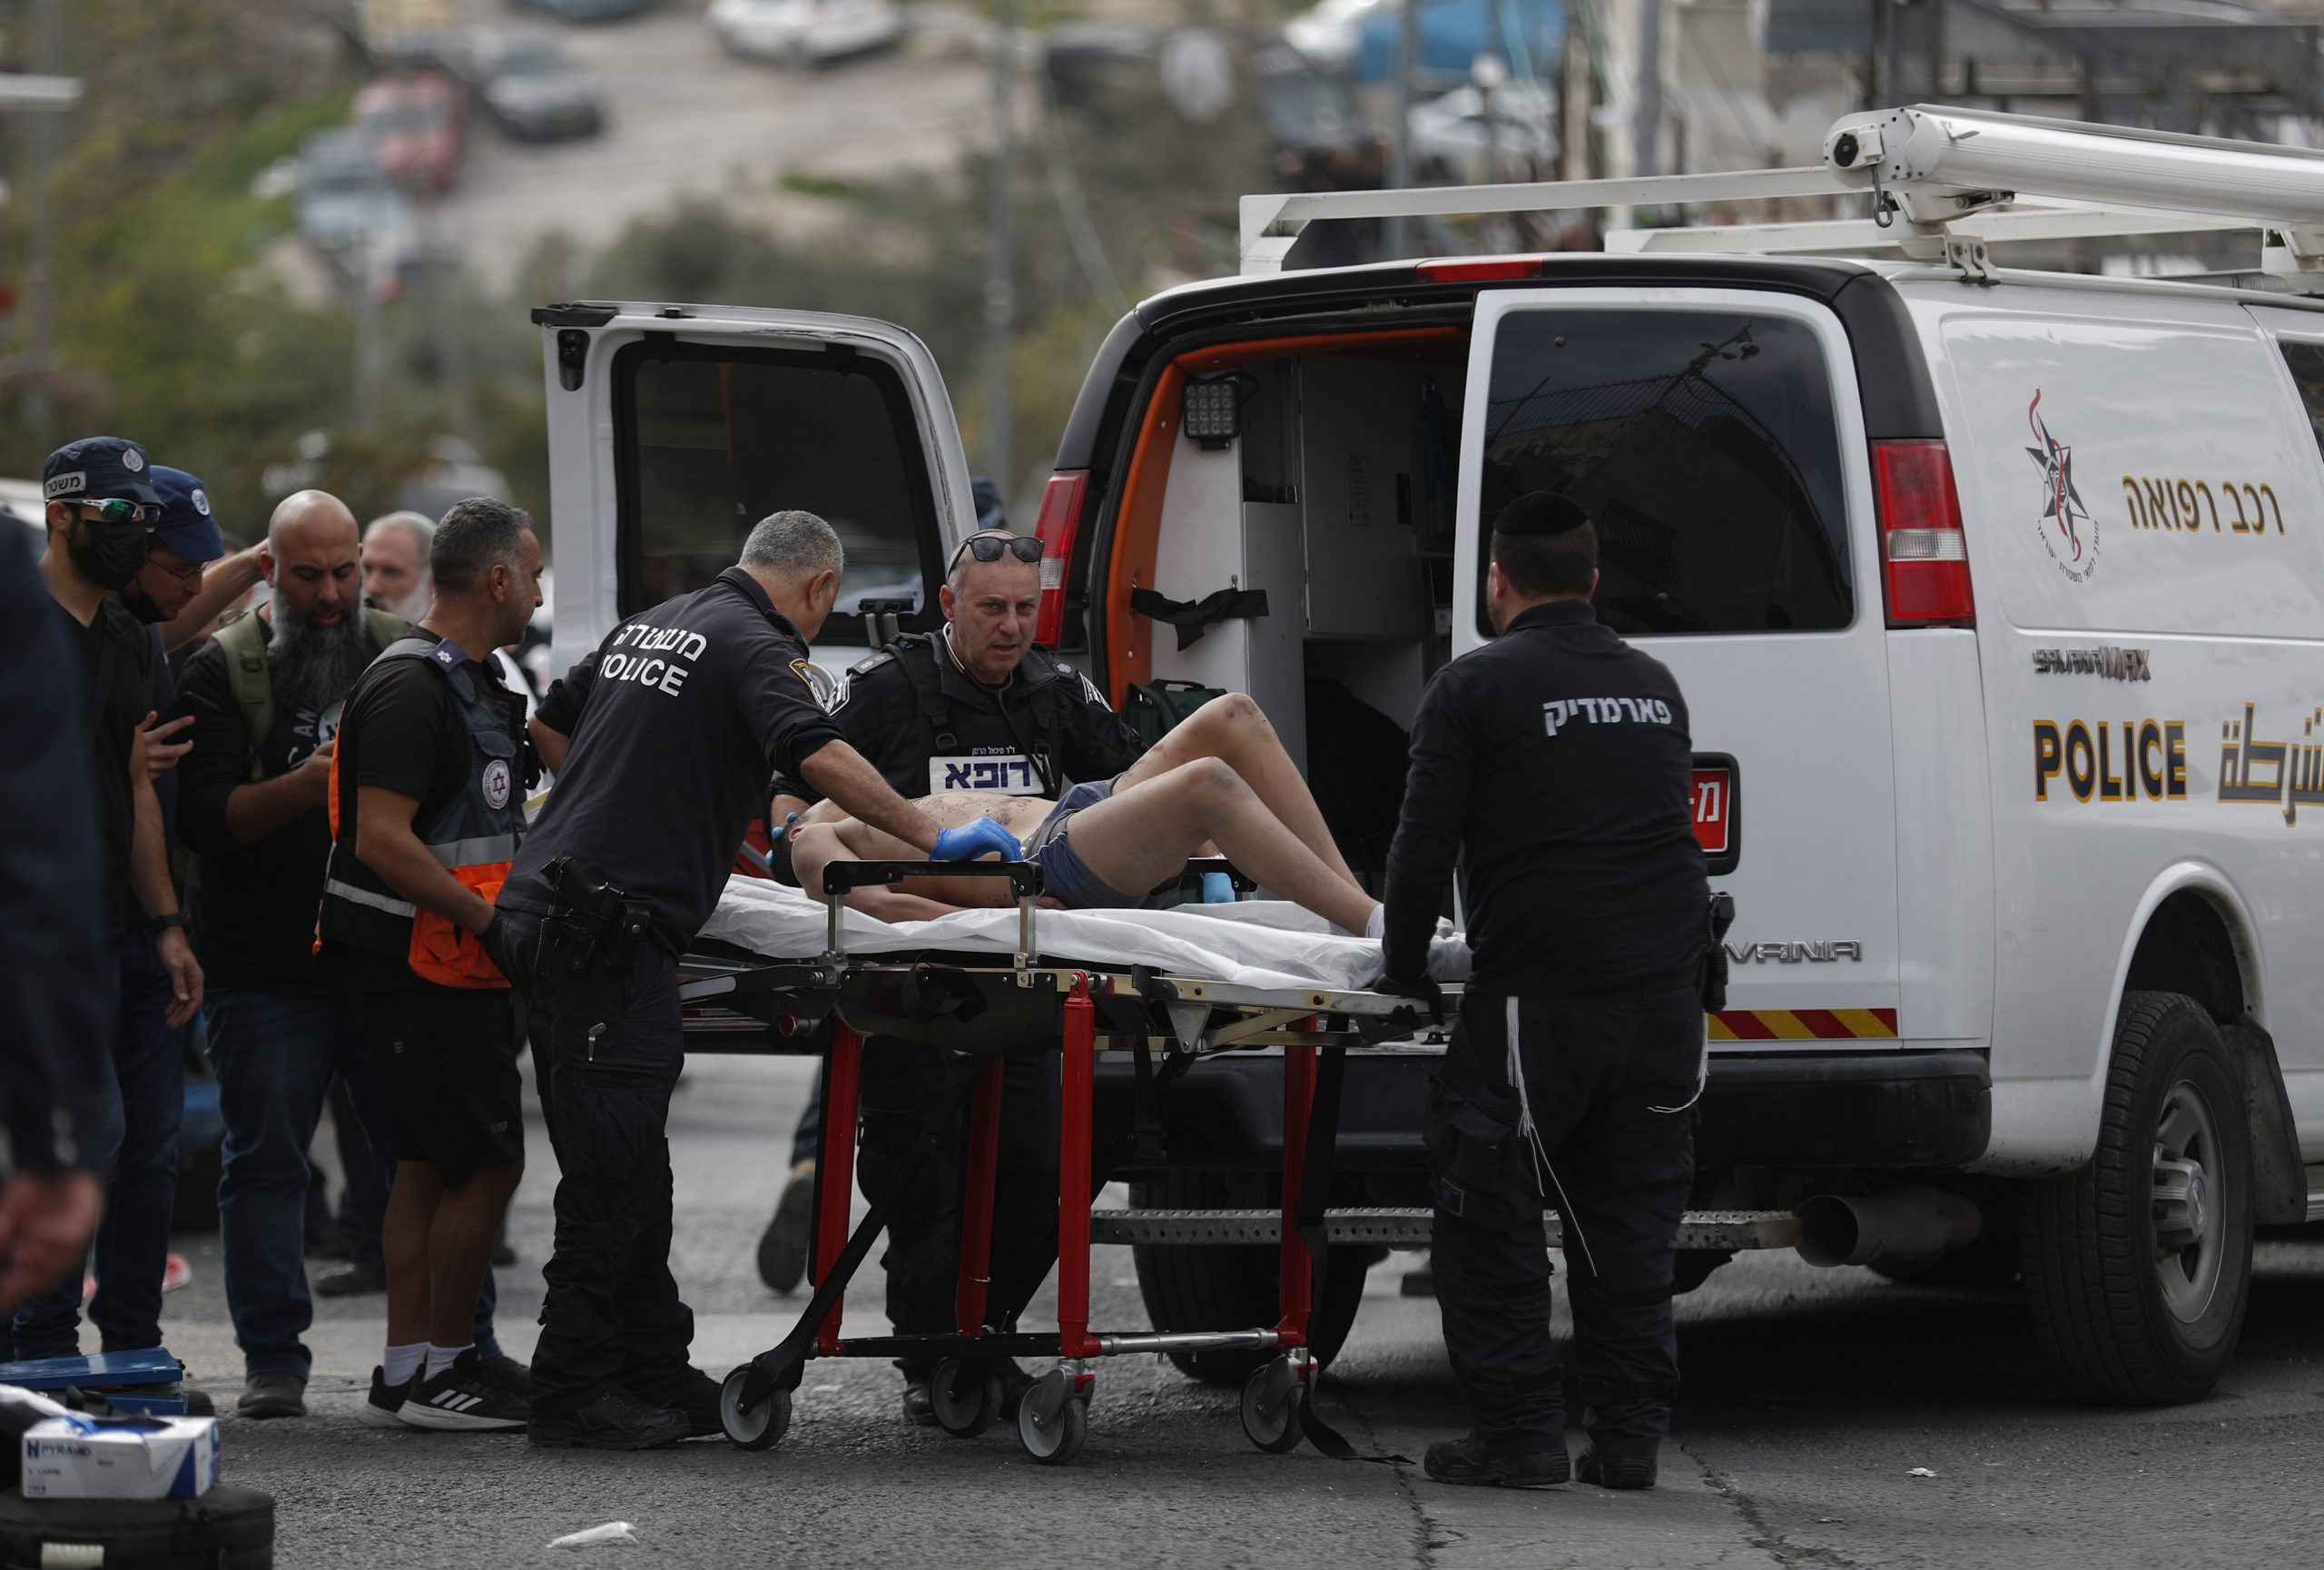 epa10435397 A man on a stretcher, suspected to be attacker, is brought to a Police van by Israeli police officers at the scene of a shooting near the Old City in Jerusalem, 28 January 2023, a day after deadly attack on synagogue. According to Israeli police and paramedic services, two men are wounded after a new shooting attack in Jerusalem. Seven people were killed and at least three other injured in a shooting attack at a synagogue in Jerusalem on 27 January.  EPA/ATEF SAFADI